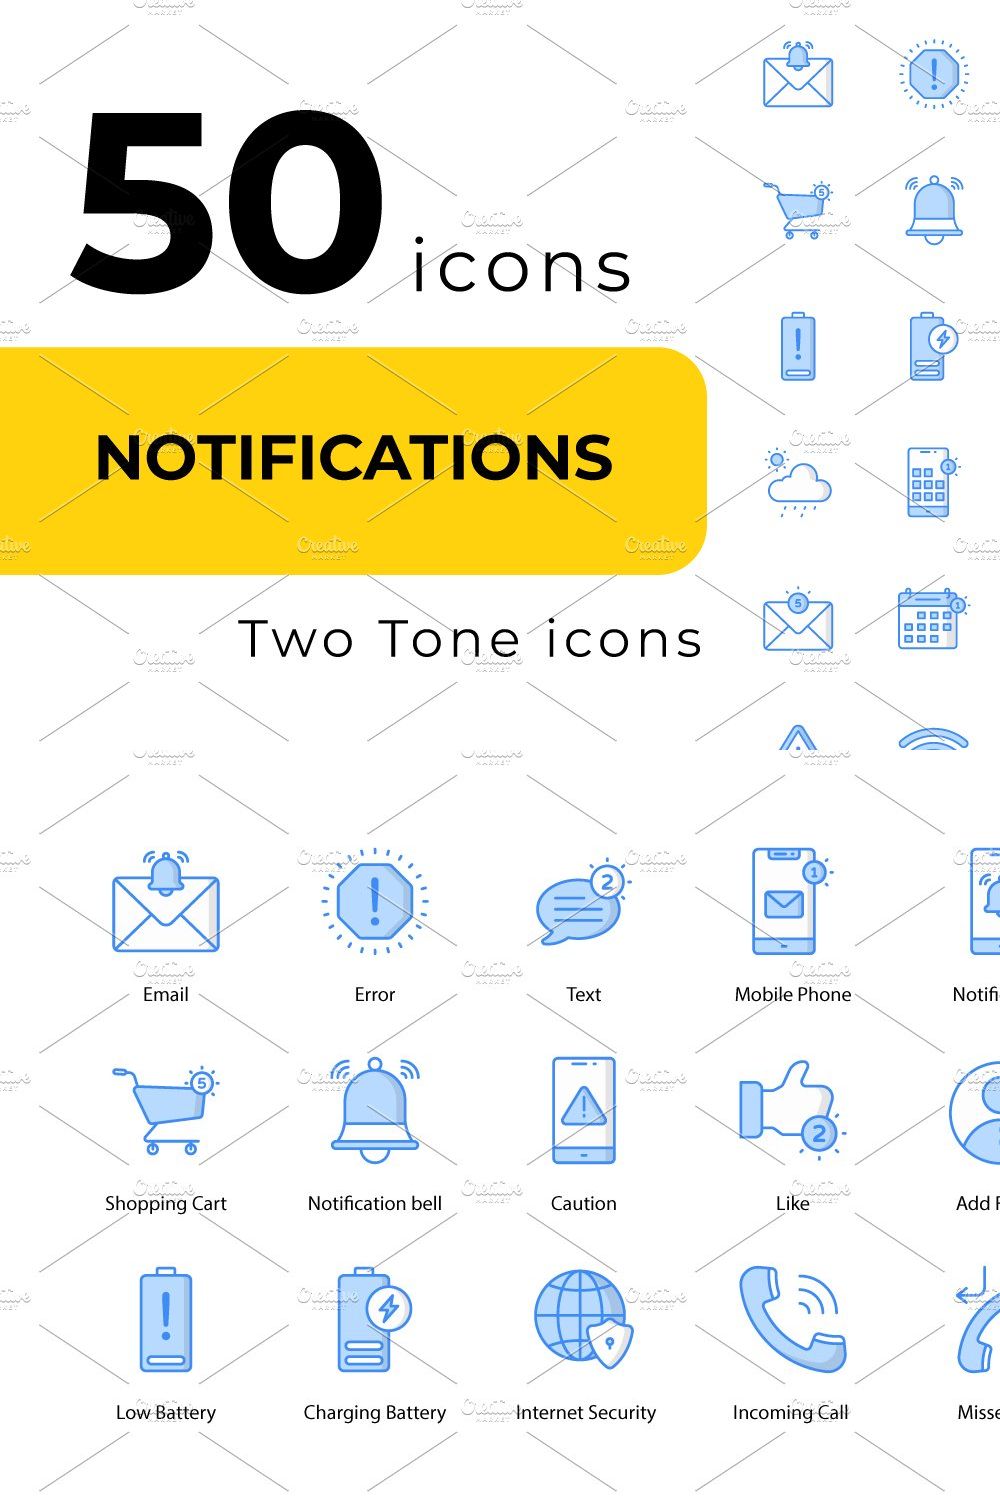 Notifications icons pinterest preview image.